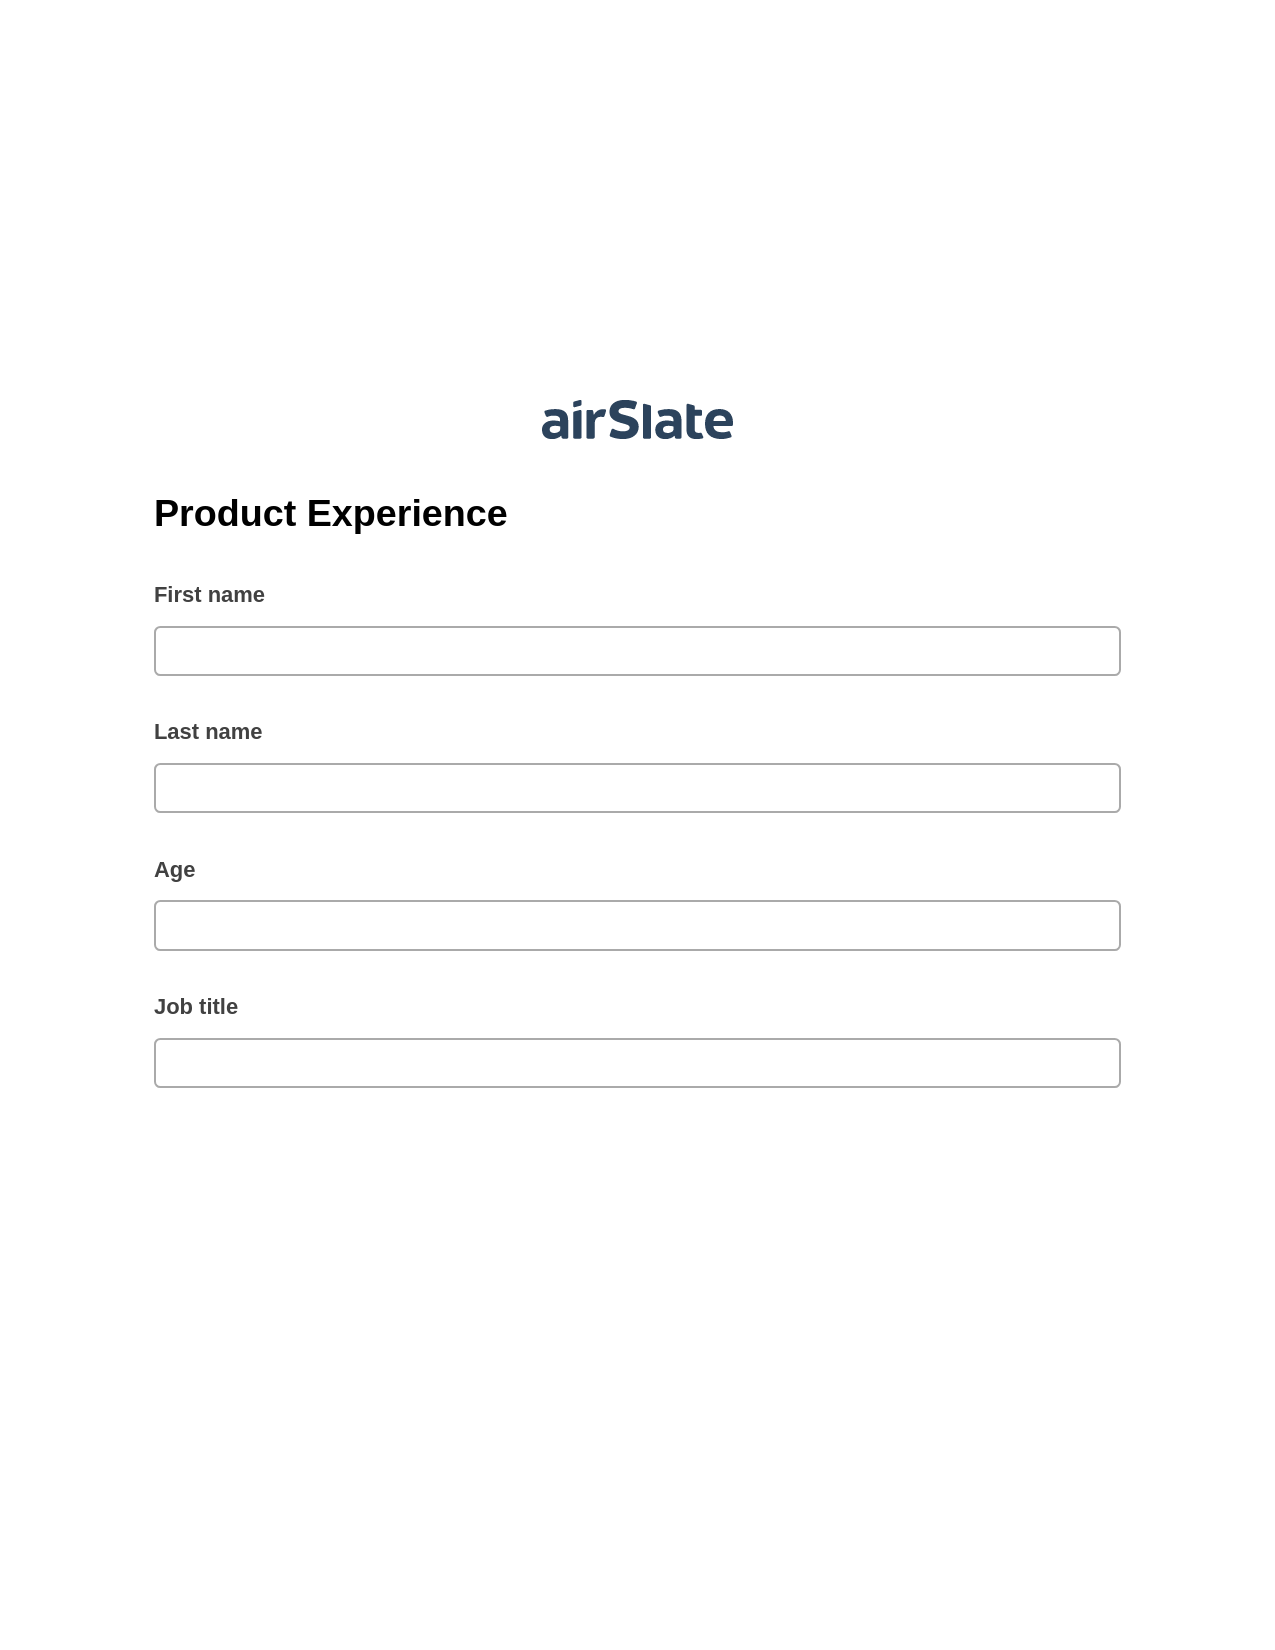 Product Experience Pre-fill Document Bot, Email Notification Bot, Export to MySQL Bot